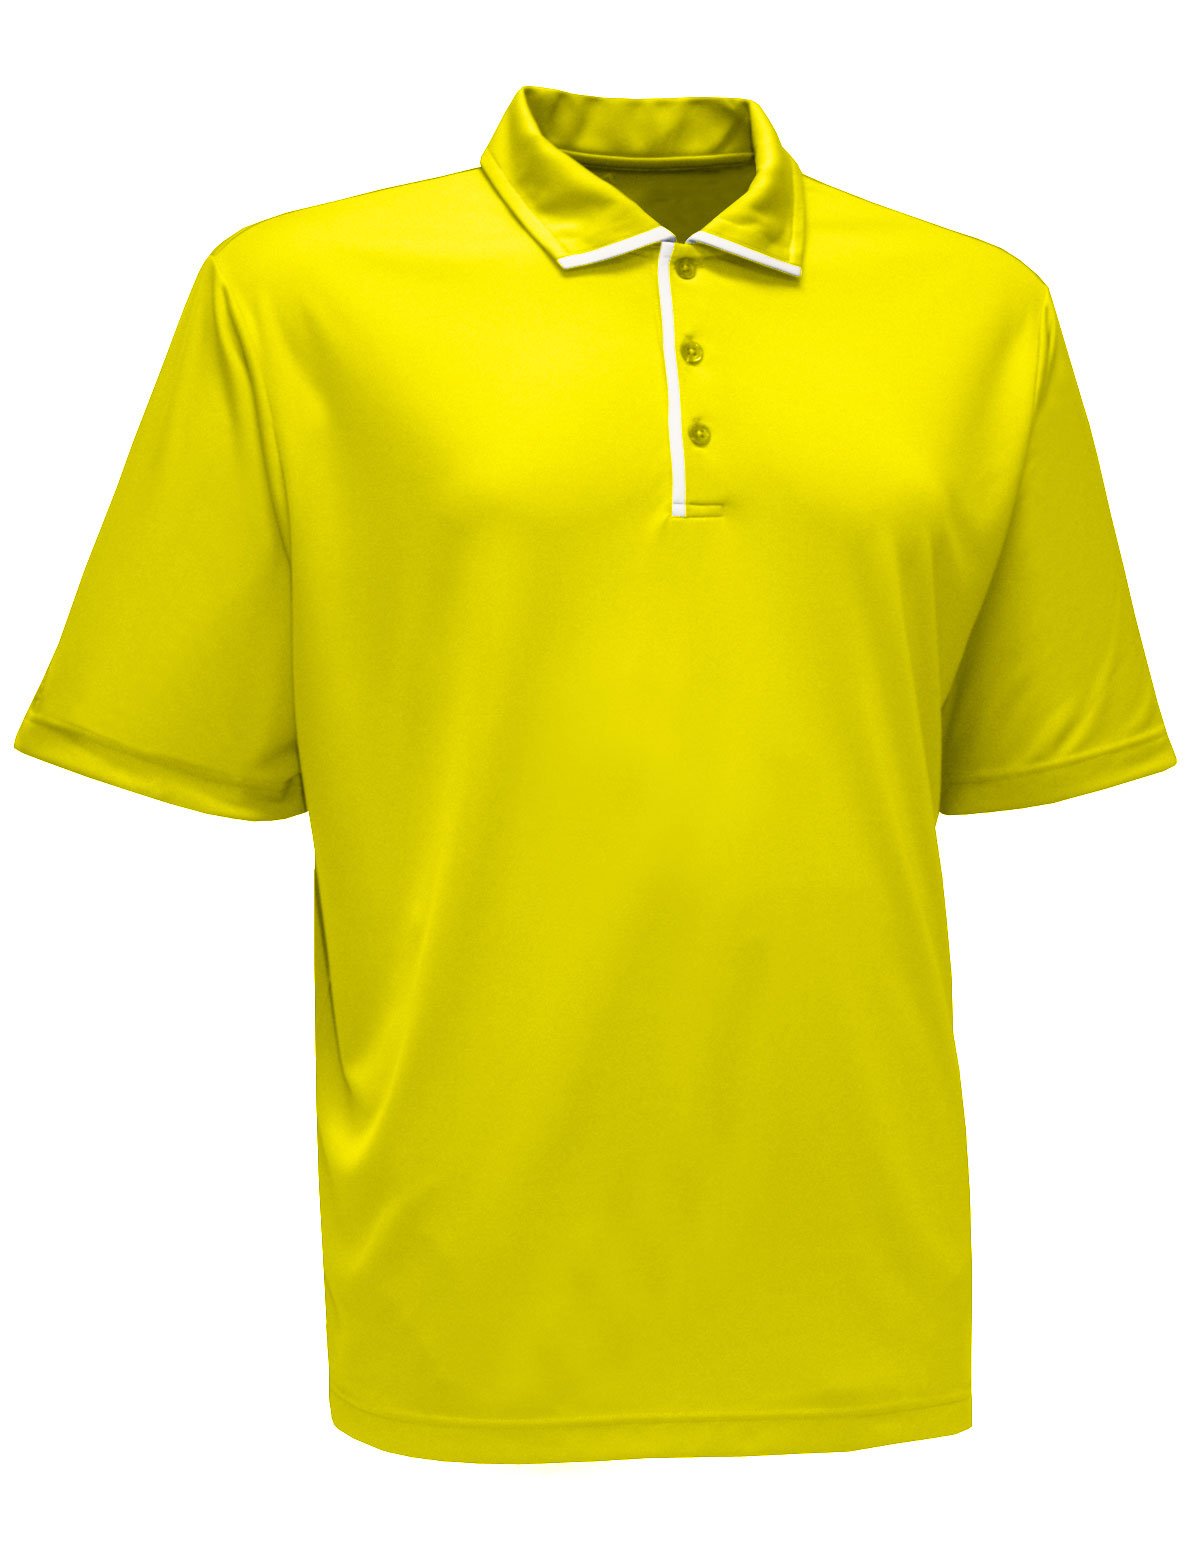 Antigua Men's Court Short Sleeve Athletic Golf Polo Shirt - Multiple Colors - image 1 of 1